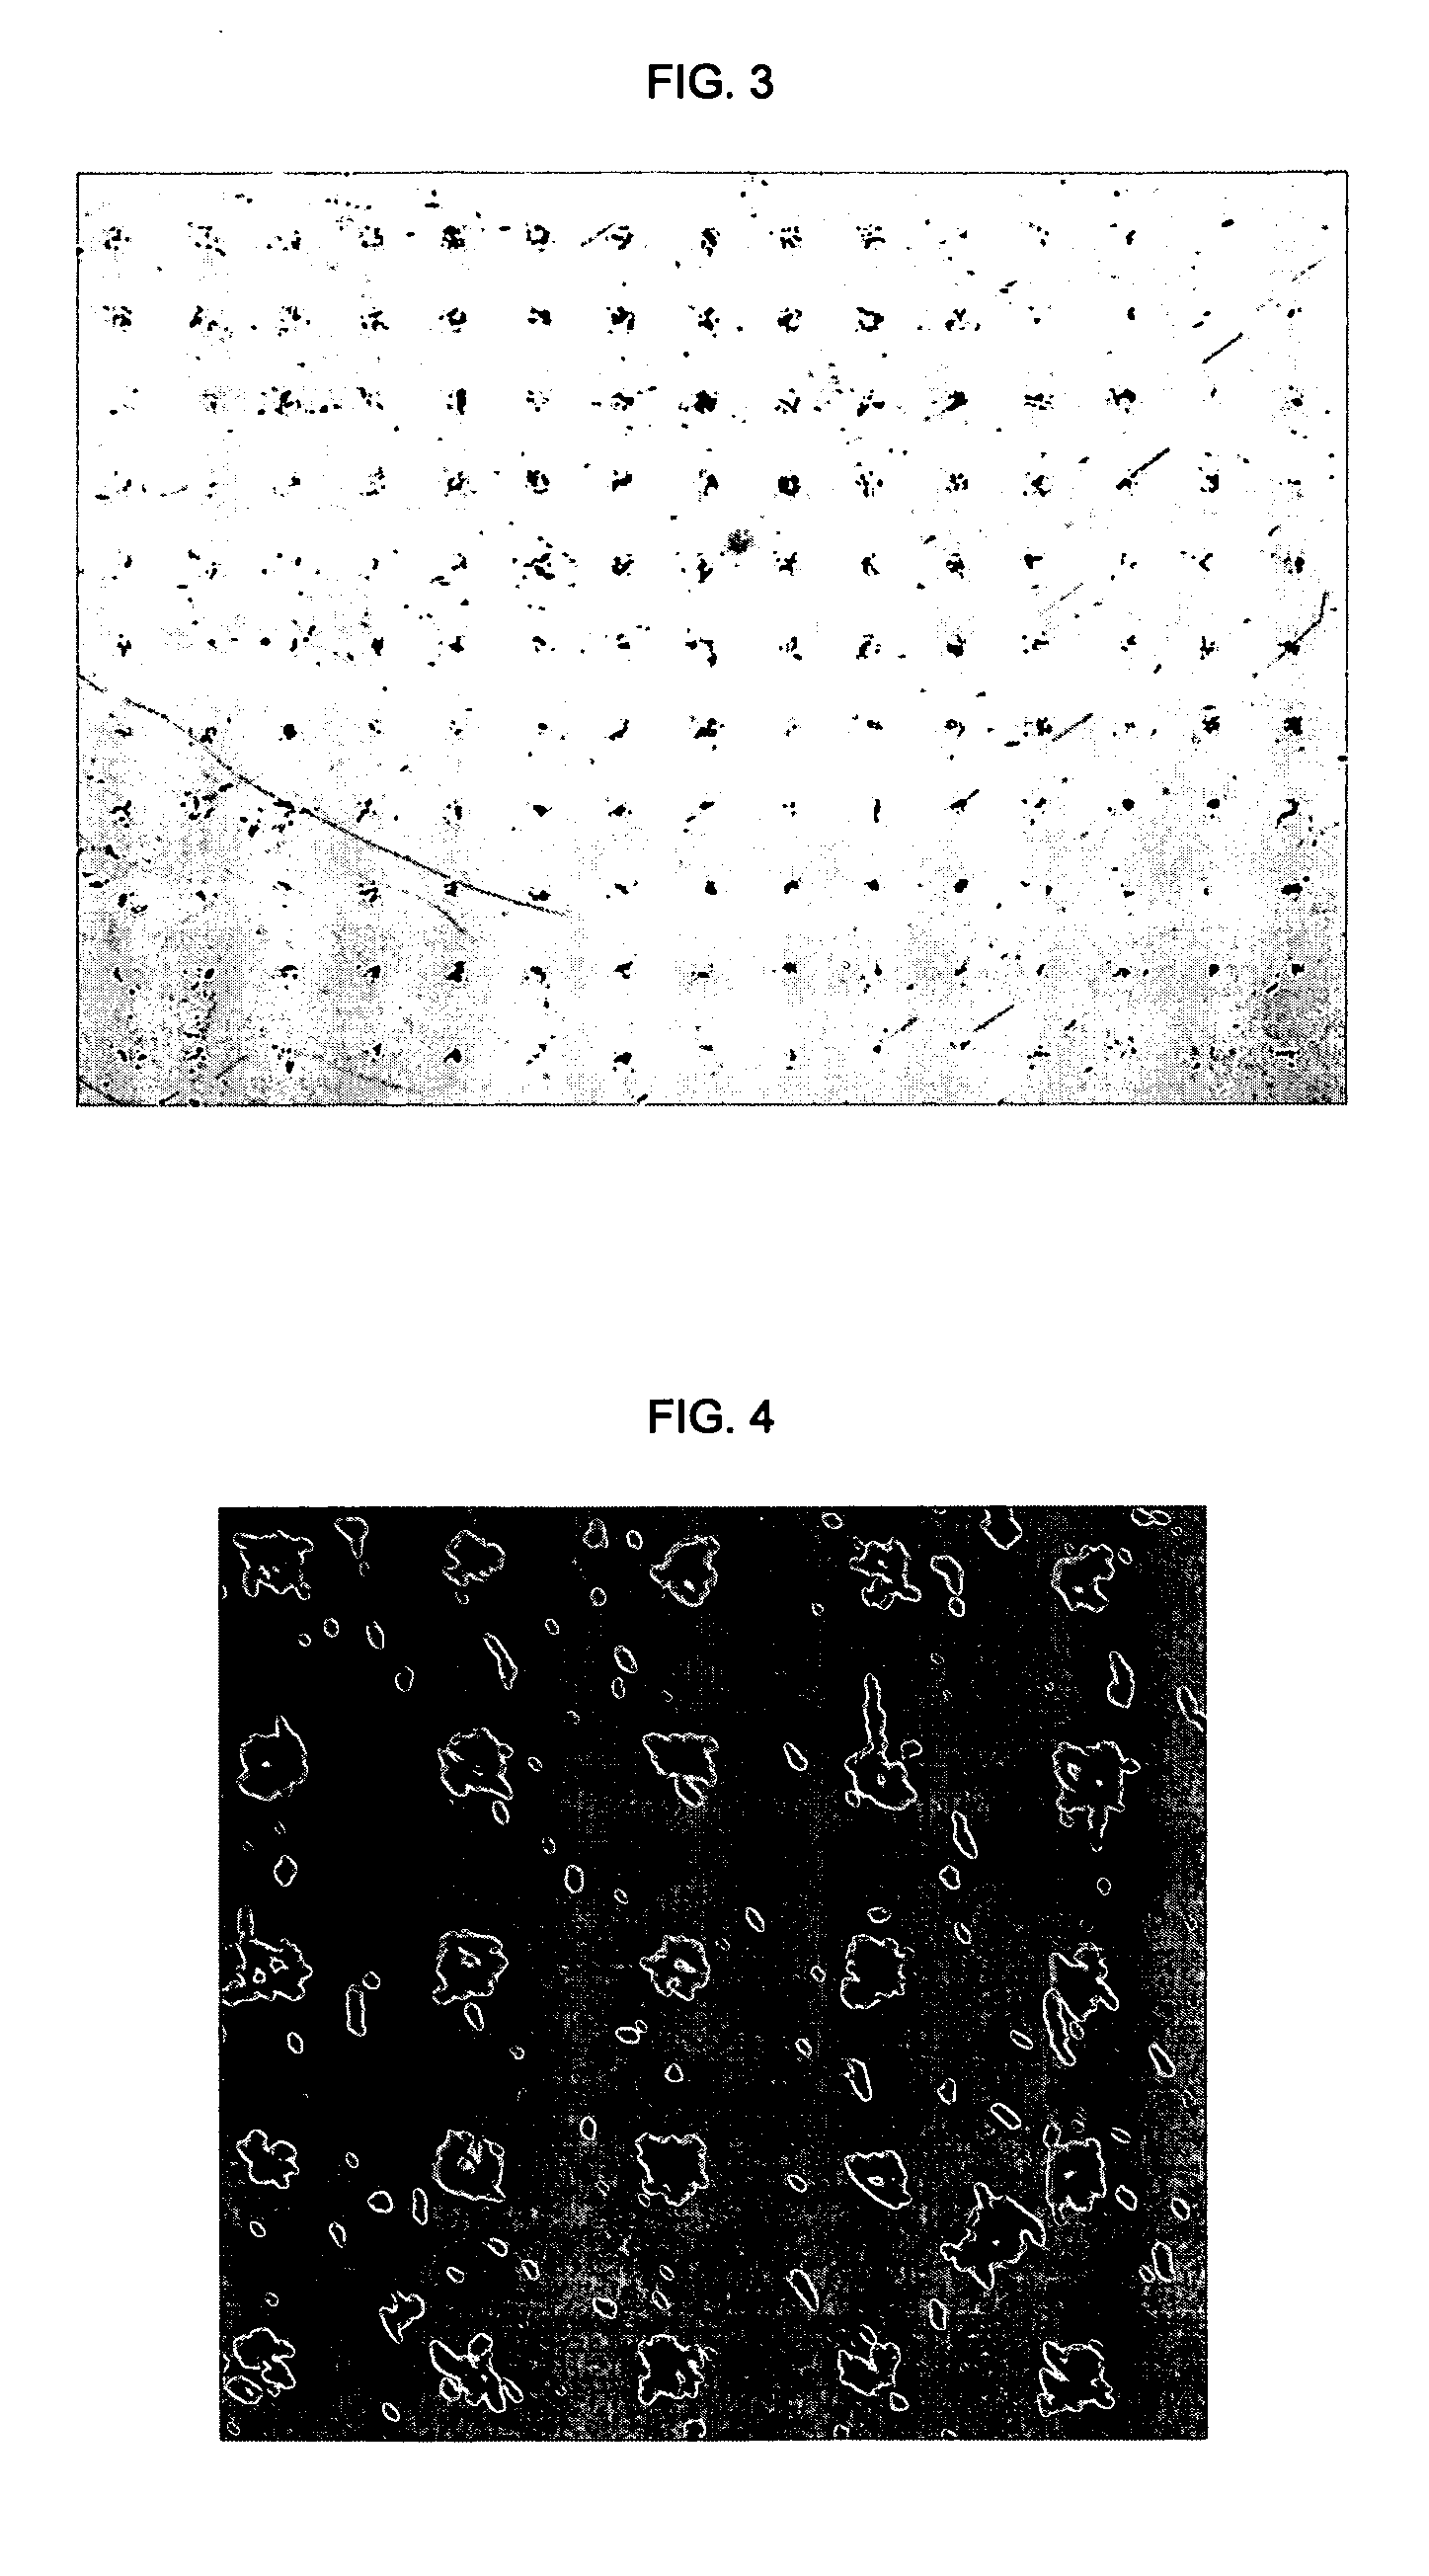 Patterning crystalline compounds on surfaces